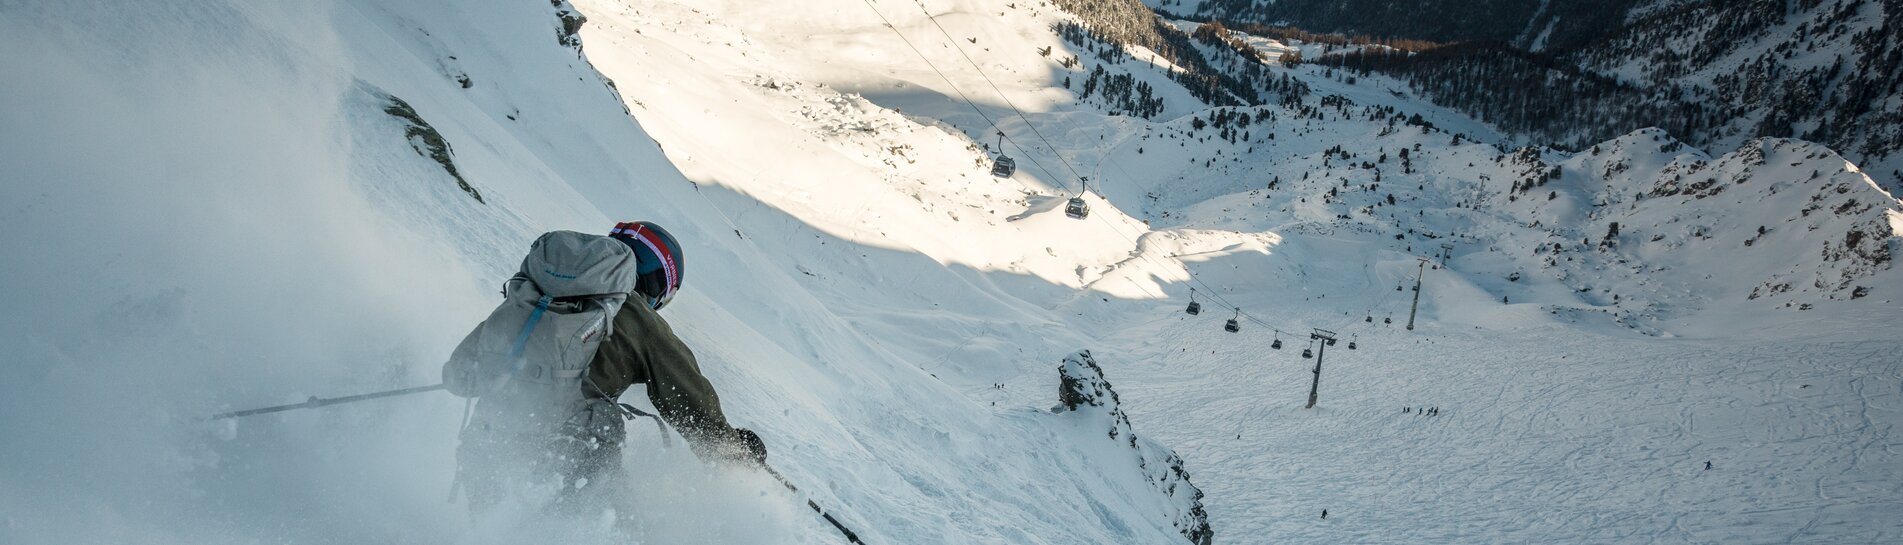 Freeride itinerary Chassoure, Verbier